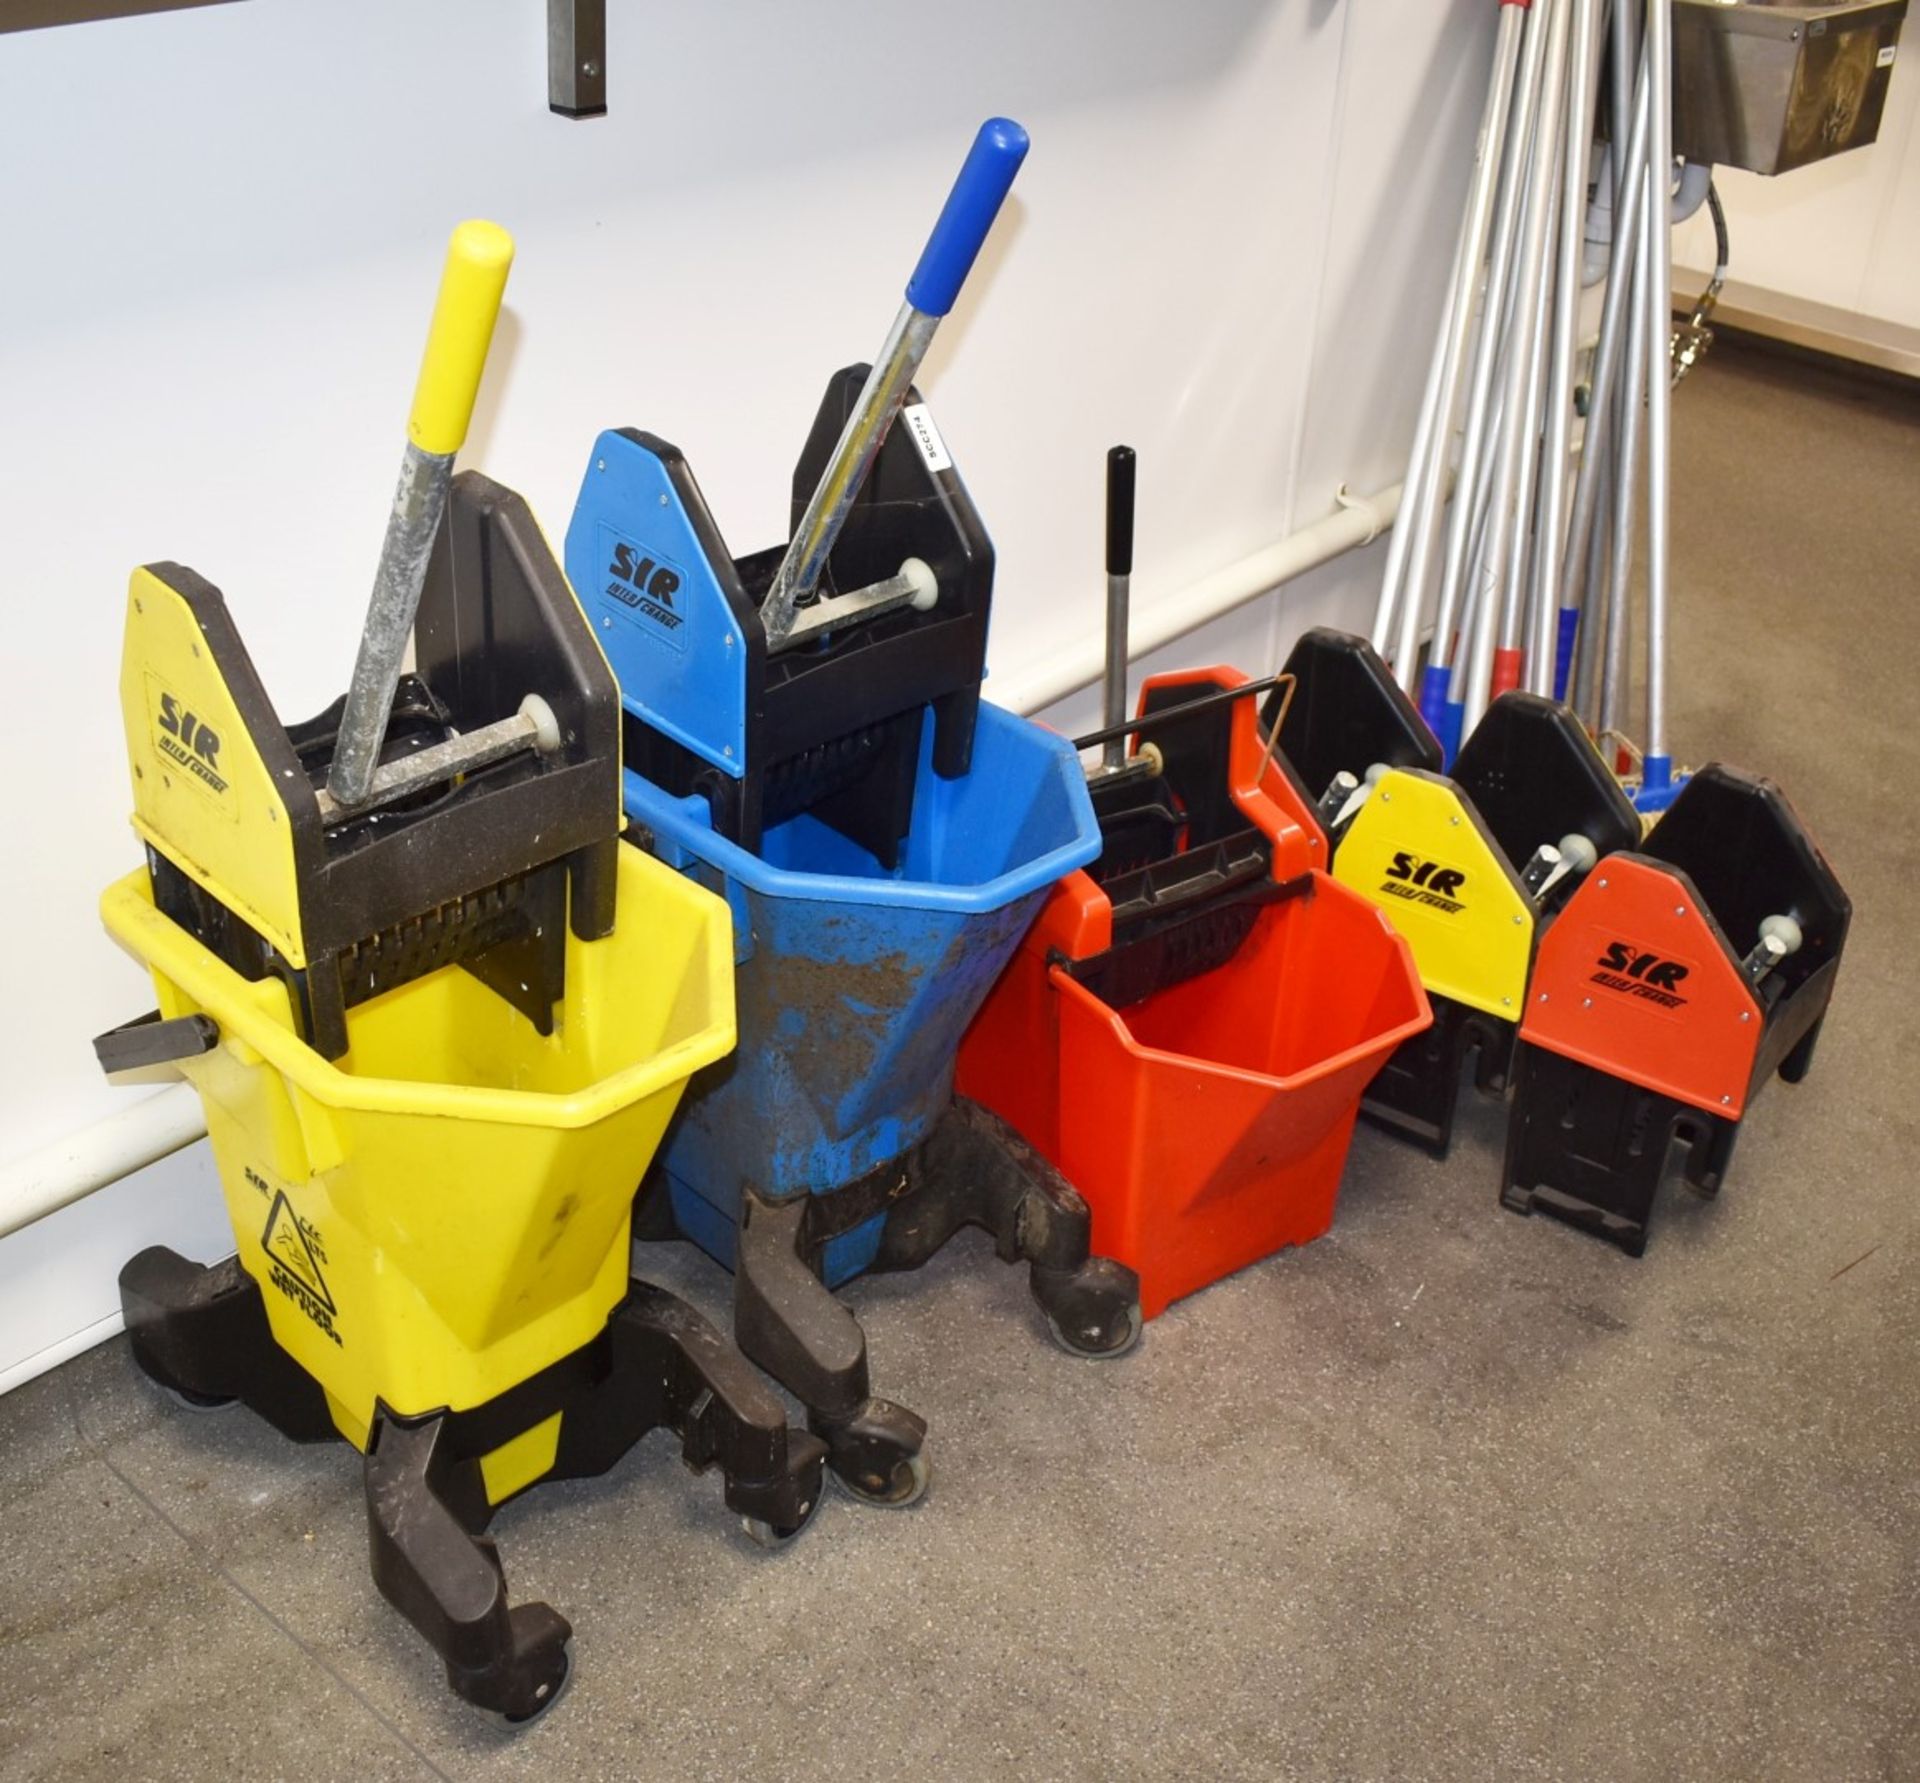 1 x Assorted Collection of Commercial Mop Buckets, Spare Squeeze Wringers and 18 x Mop Handles - Image 8 of 8